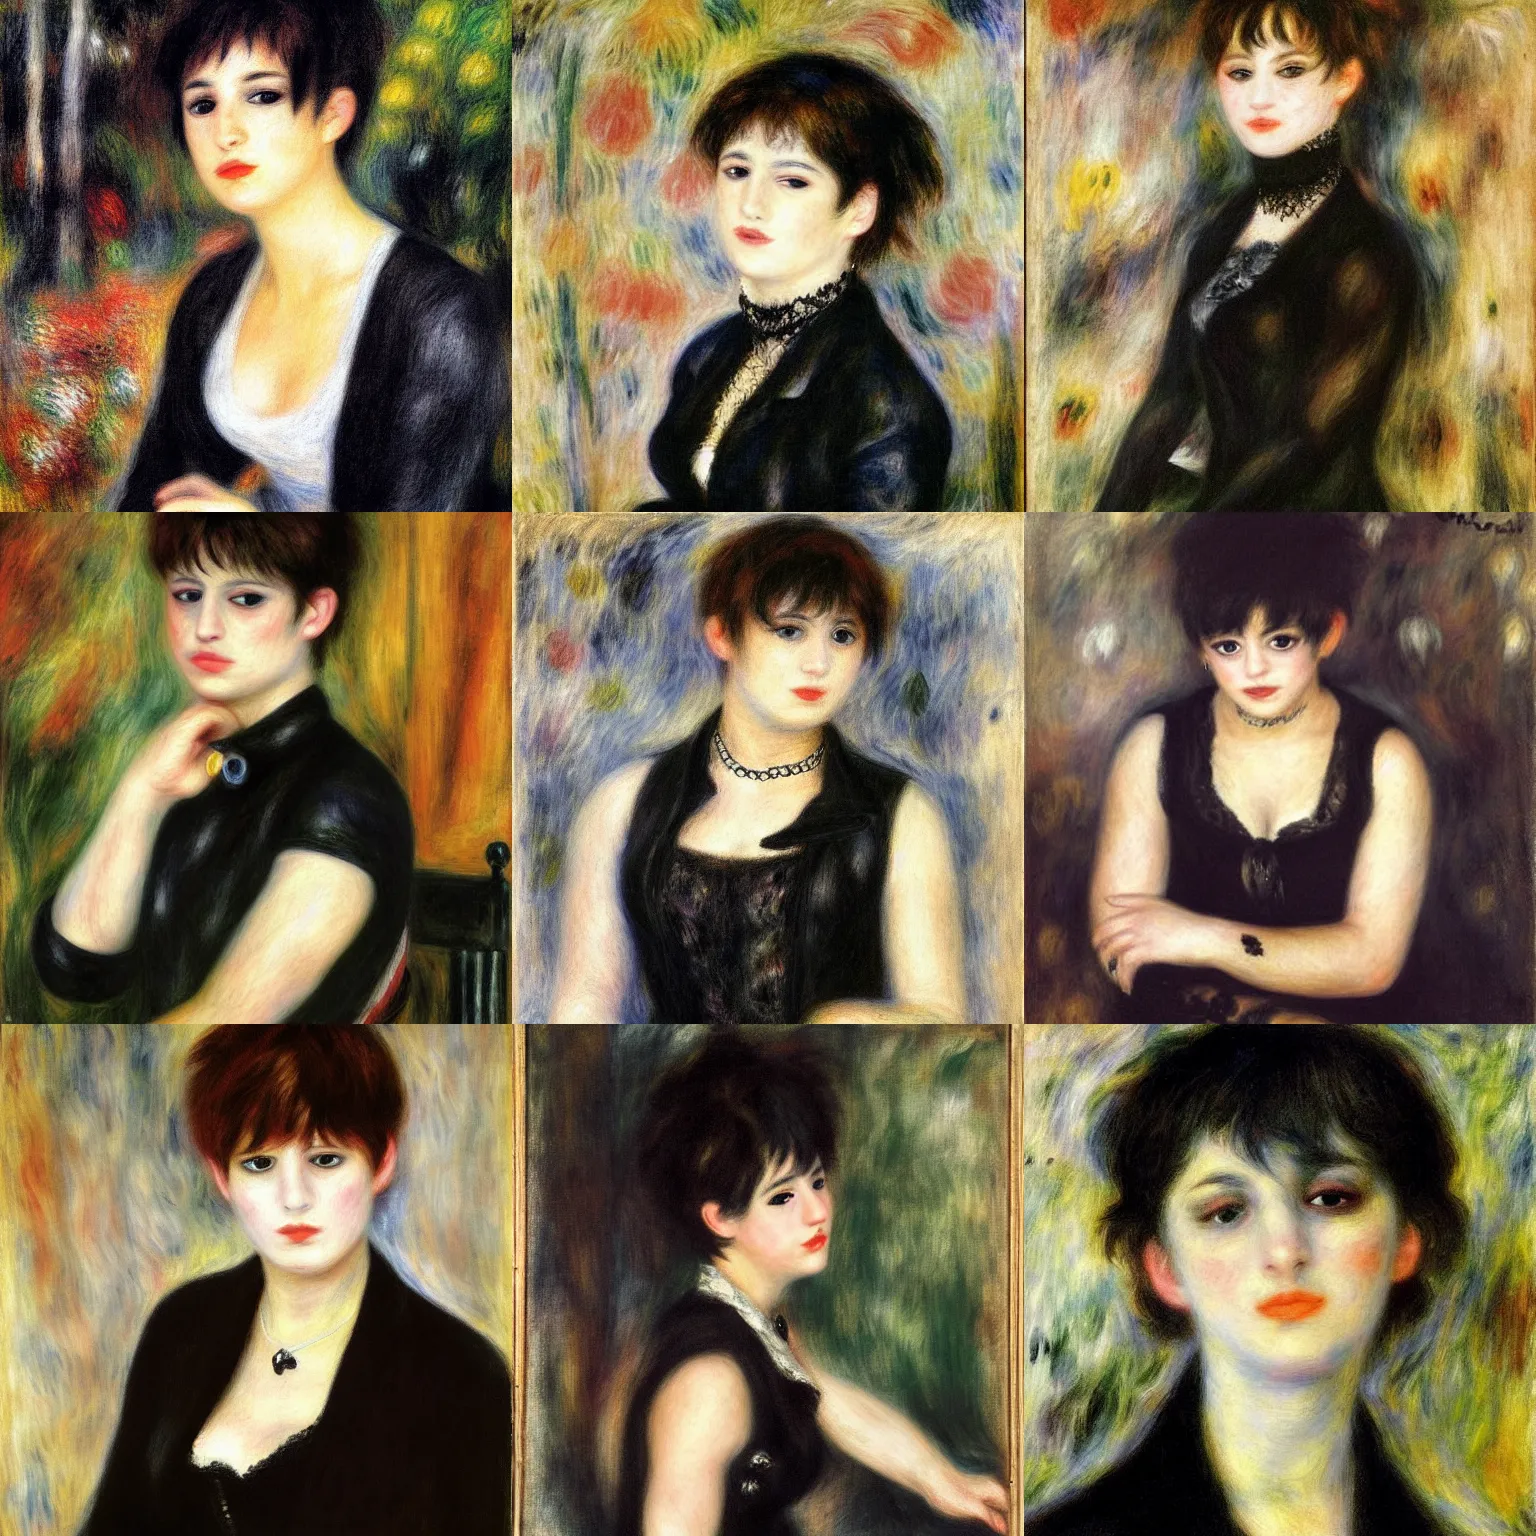 Prompt: an emo portrait by pierre - auguste renoir. her hair is dark brown and cut into a short, messy pixie cut. she has large entirely - black evil eyes. she is wearing a black tank top, a black leather jacket, a black knee - length skirt, a black choker, and black leather boots.